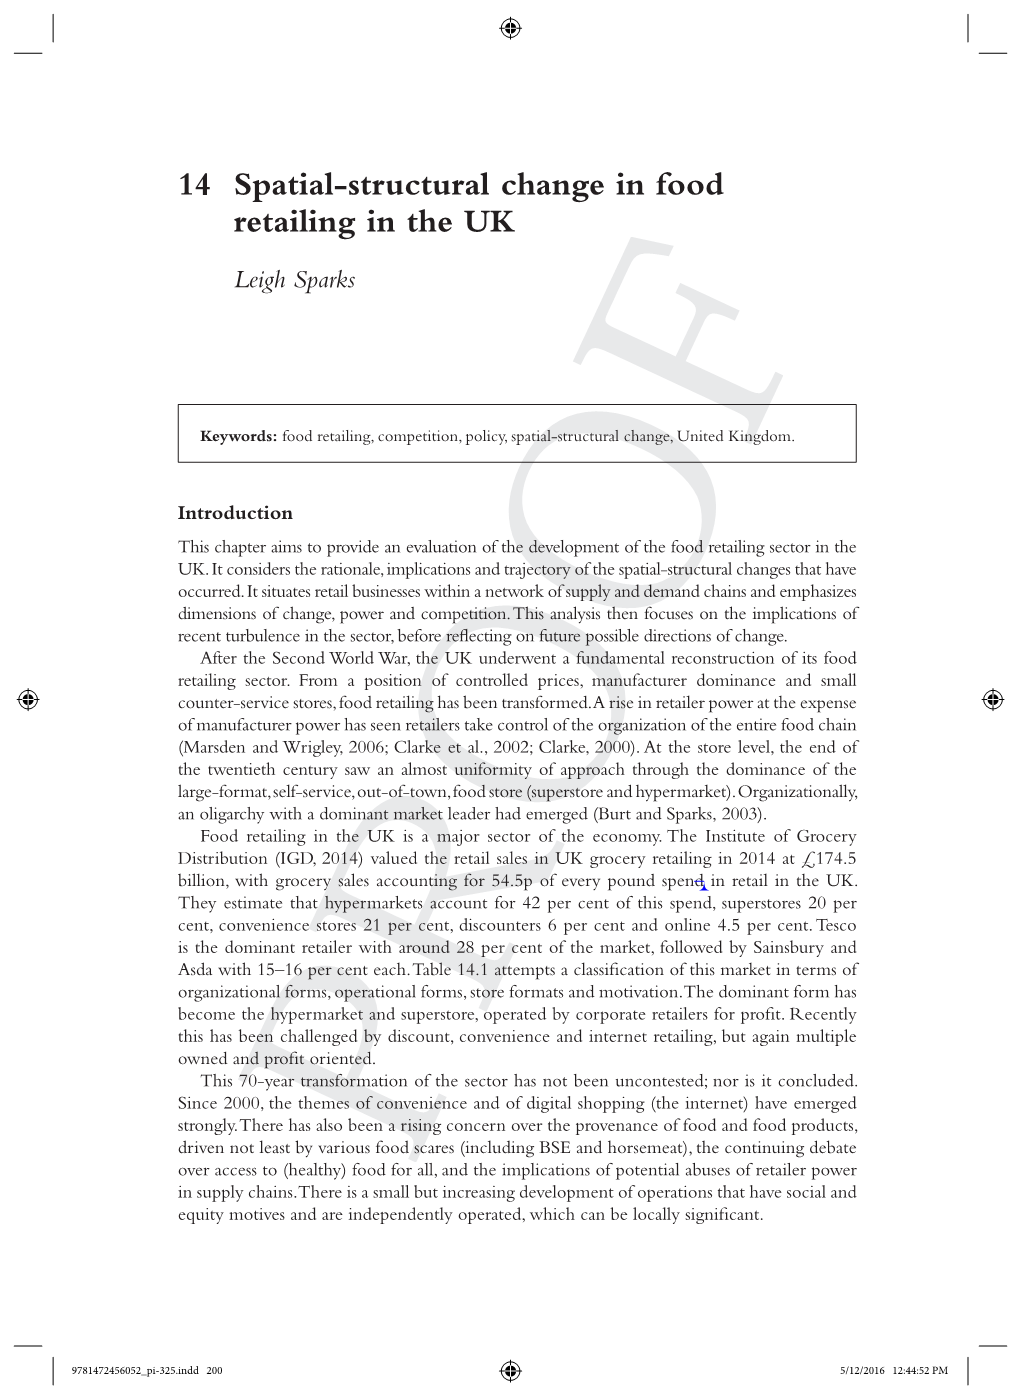 14 Spatial-Structural Change in Food Retailing in the UK